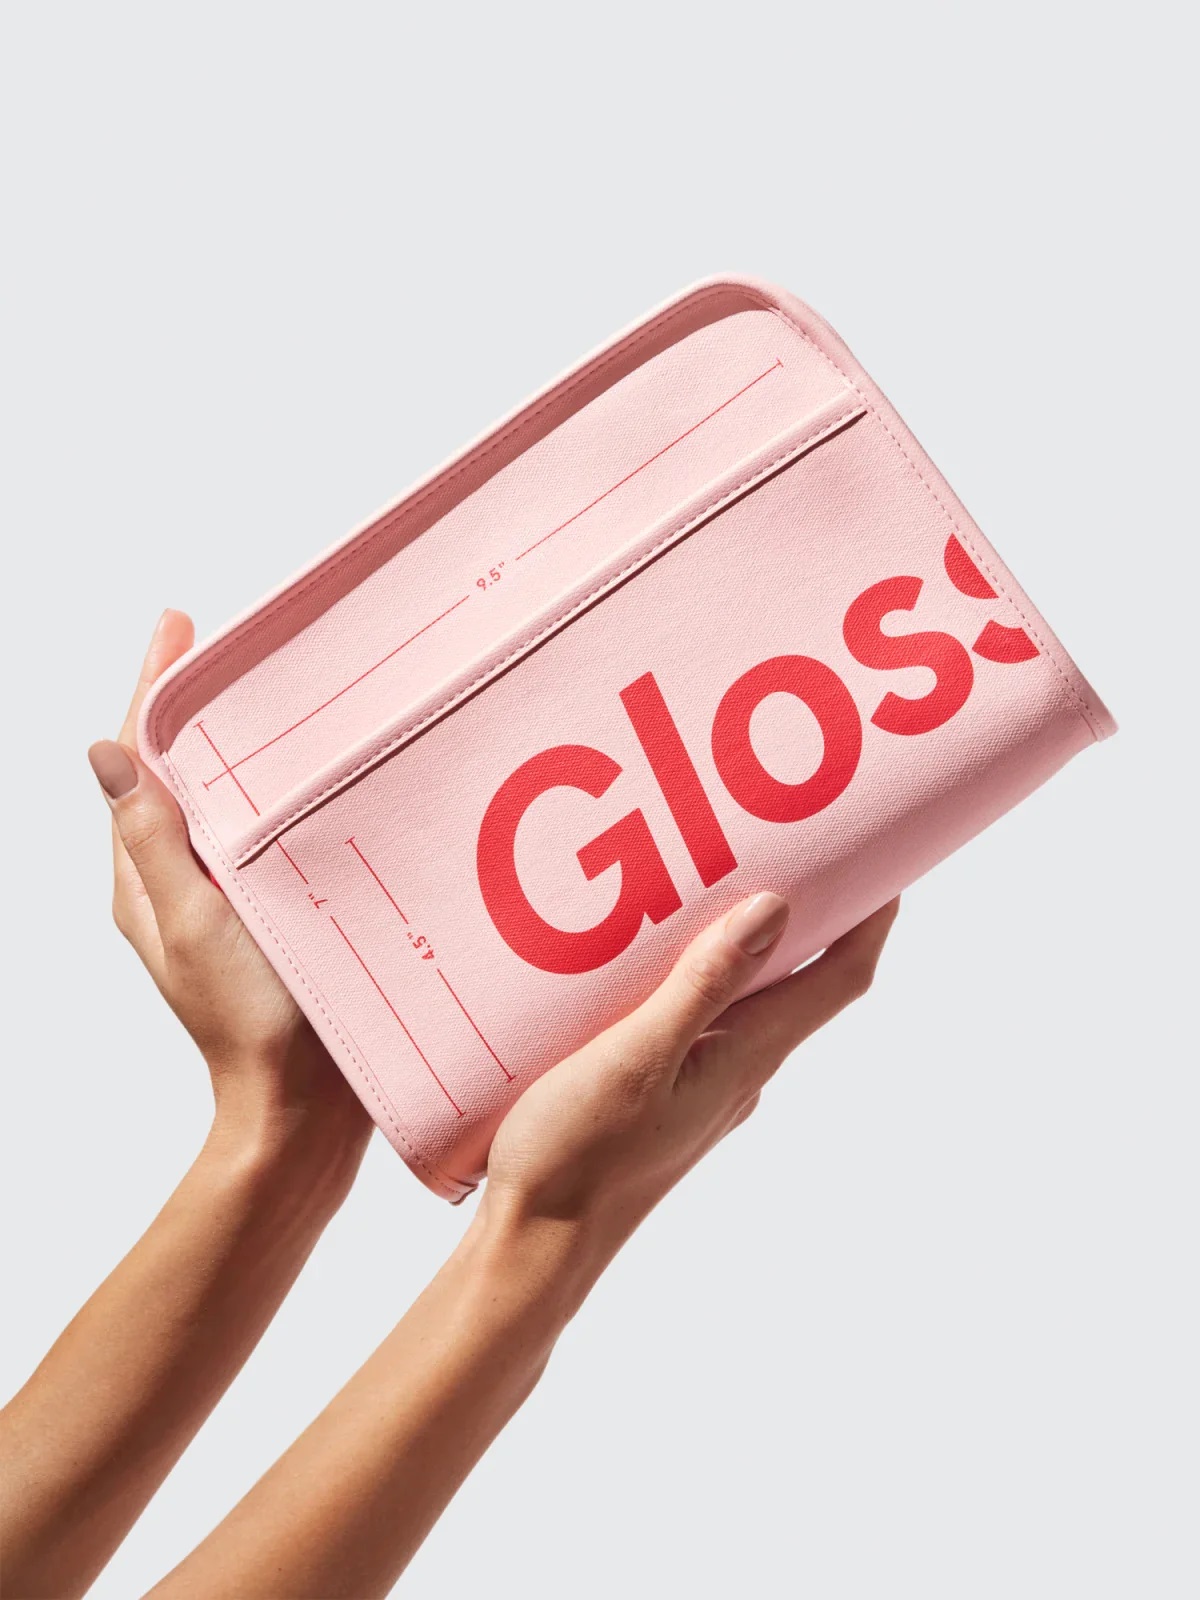 Material and Design of Glossier Makeup Bag